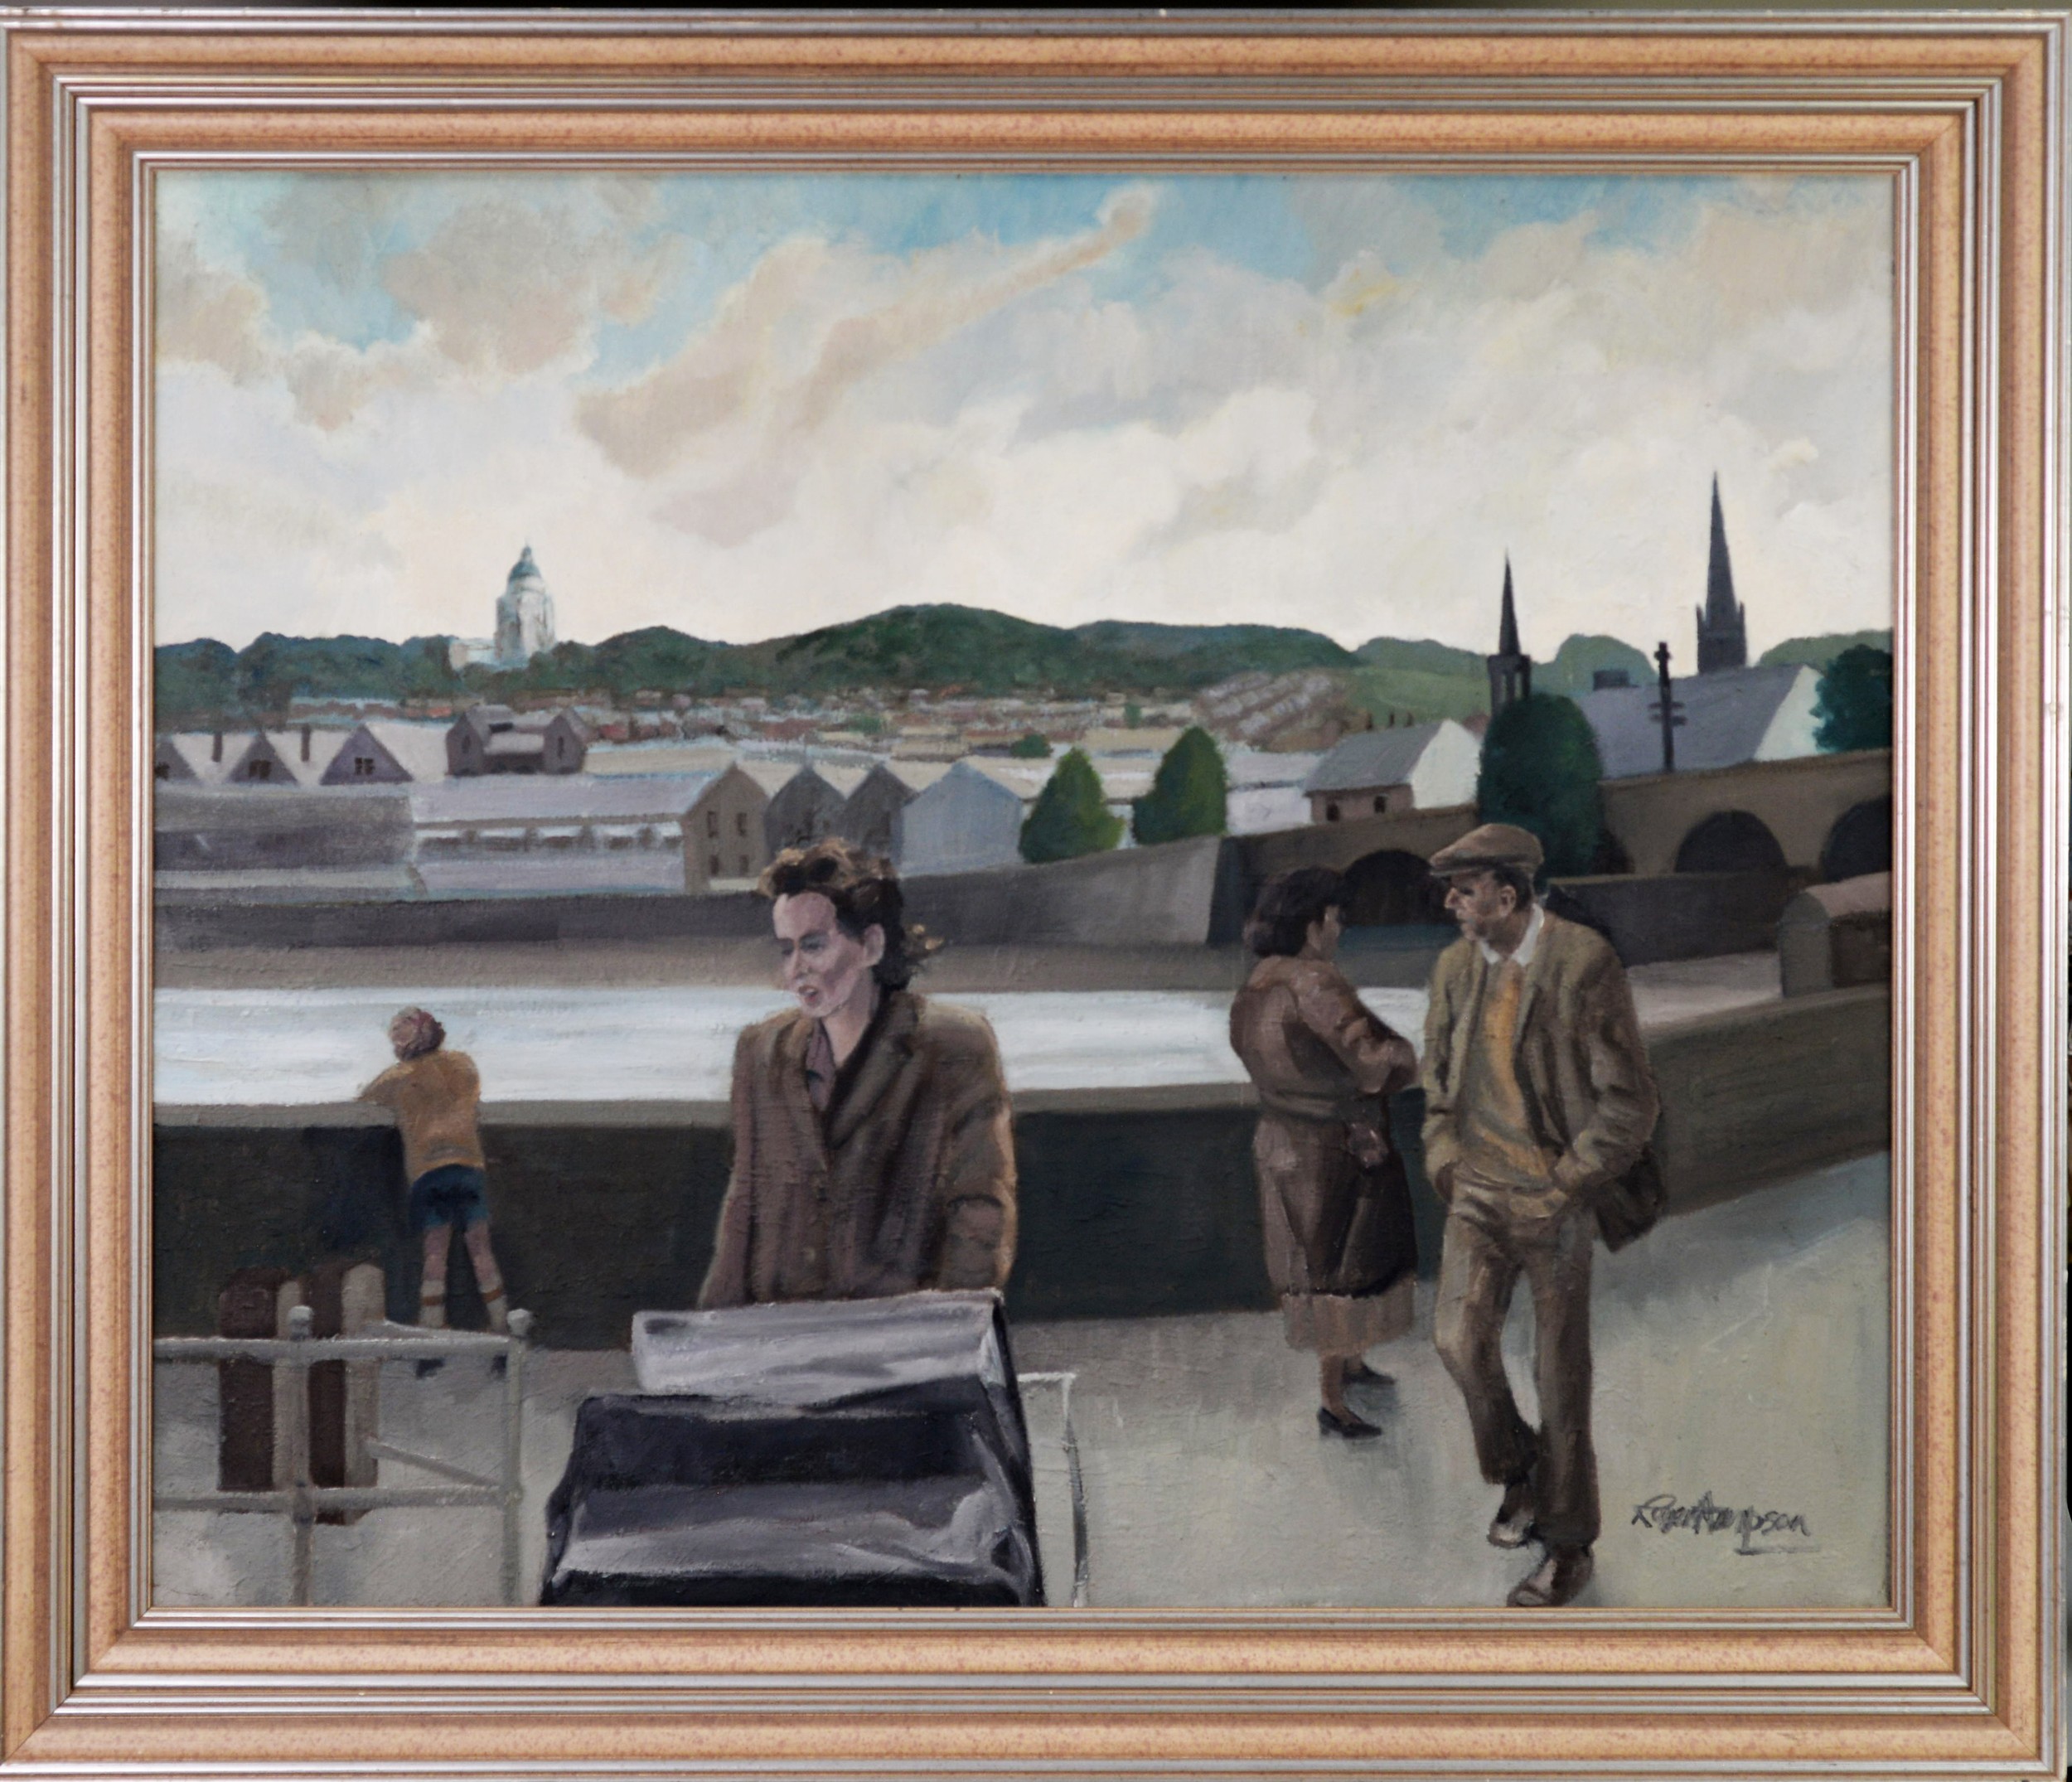 ROGER HAMPSON (1925 - 1996) OIL PAINTING ON CANVAS Lancaster viewed over the river Lune with figures - Image 2 of 2